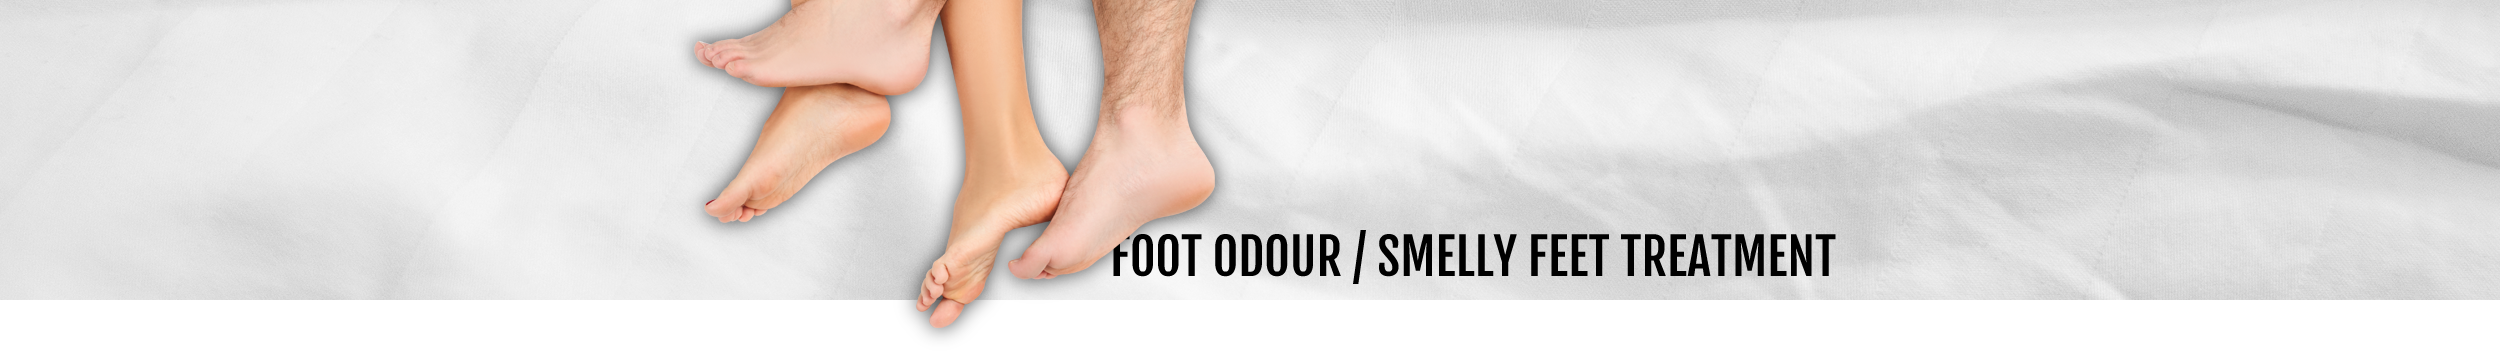 Foot Odour / Smelly Feet treatment header for the Walk IN Foot Clinic in central London